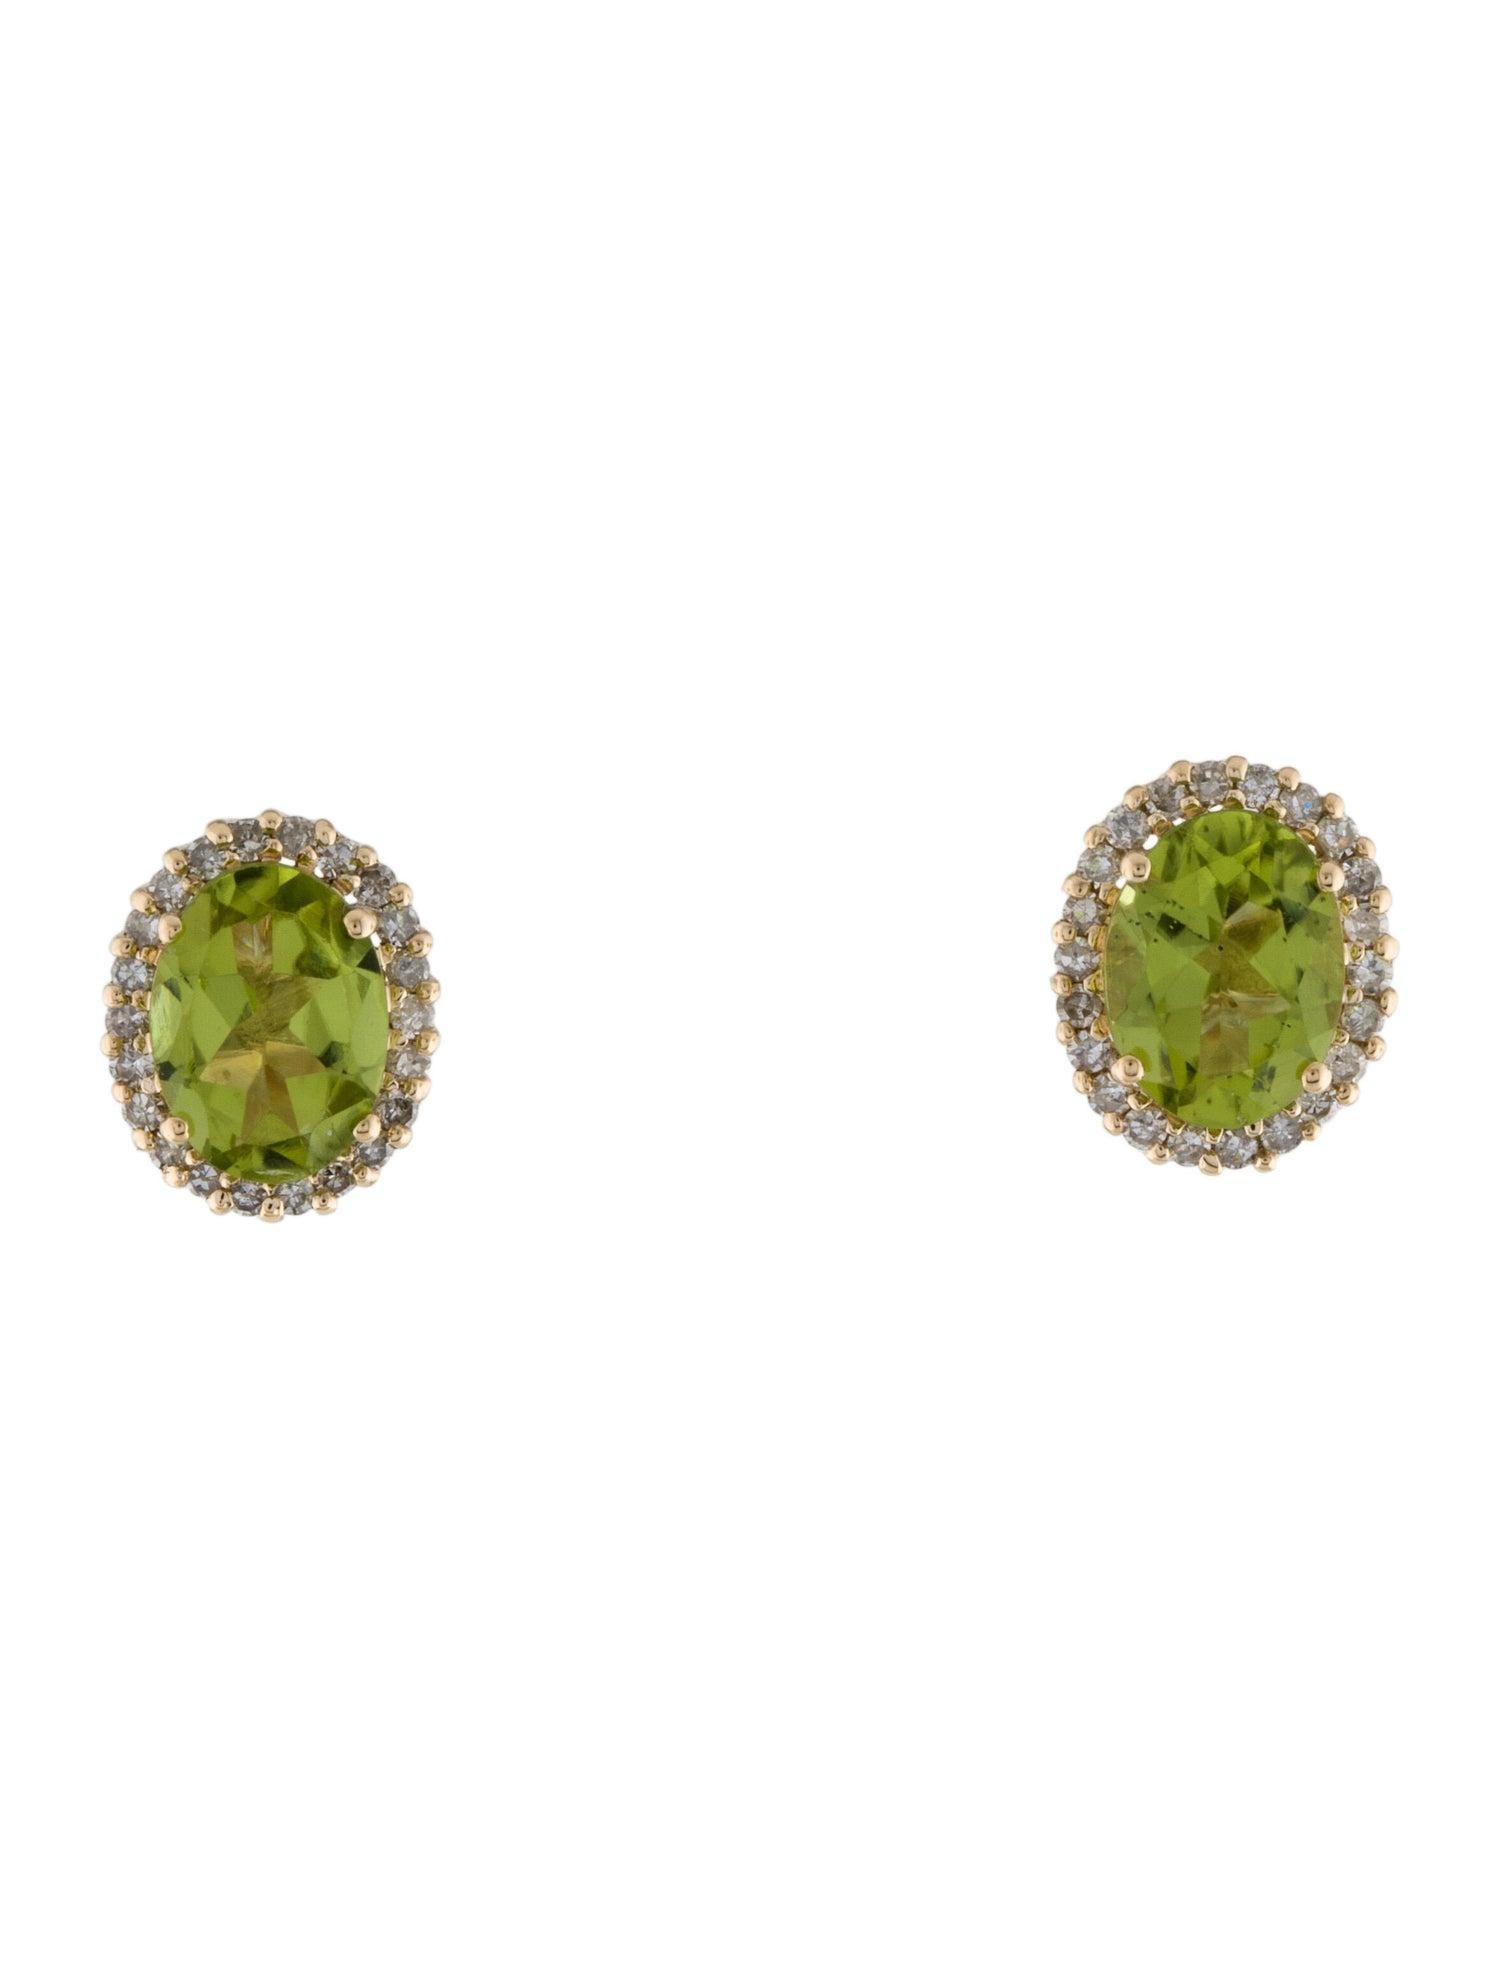 Elevate your elegance with our Harmony in Green collection, a testament to the timeless beauty of nature encapsulated in every piece. Presenting our exquisite 14k Gold Peridot and Diamond Earrings, a celebration of tranquility and